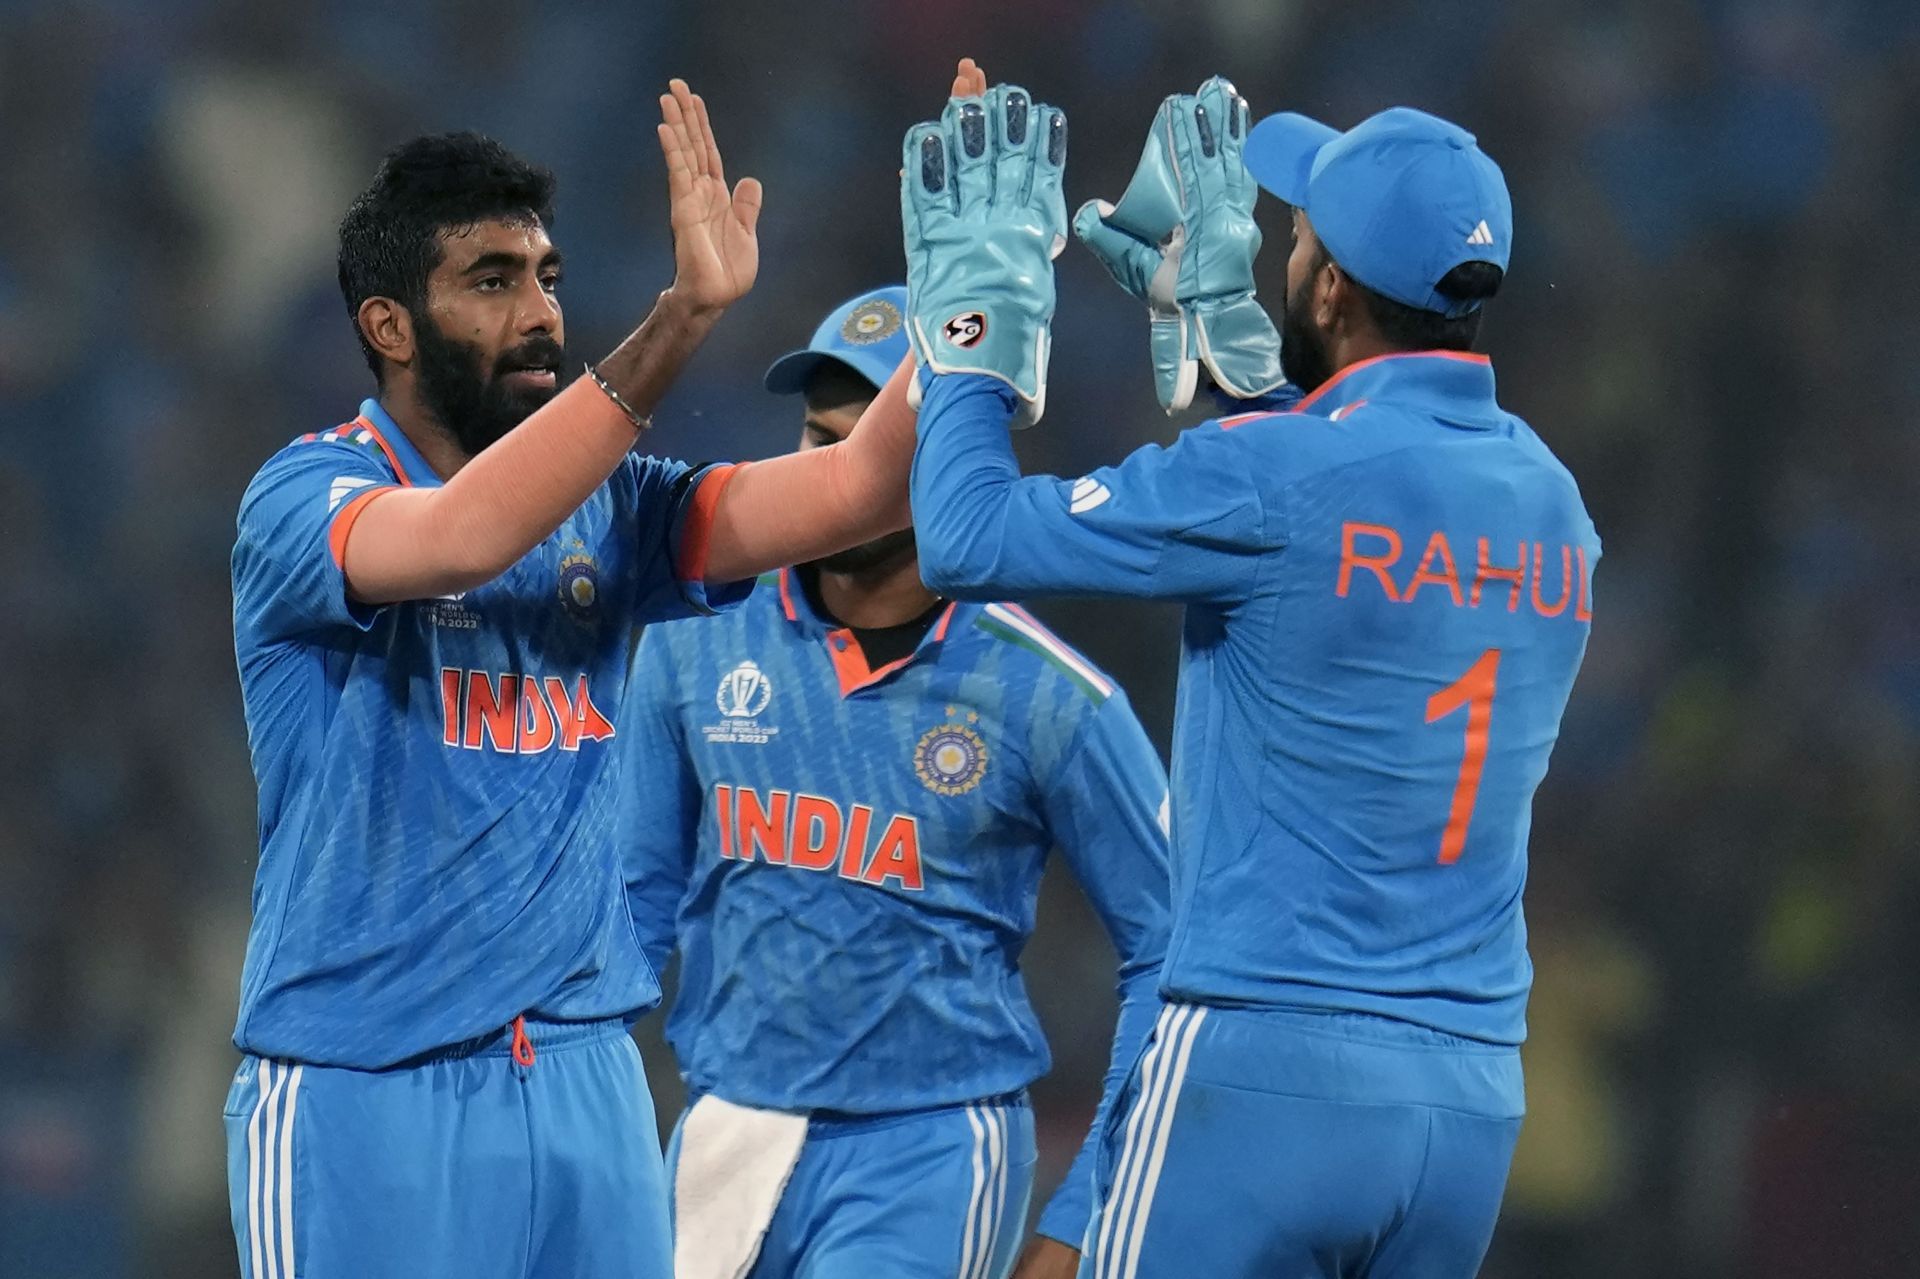 India&#039;s spearhead set the tone with a terrific powerplay spell